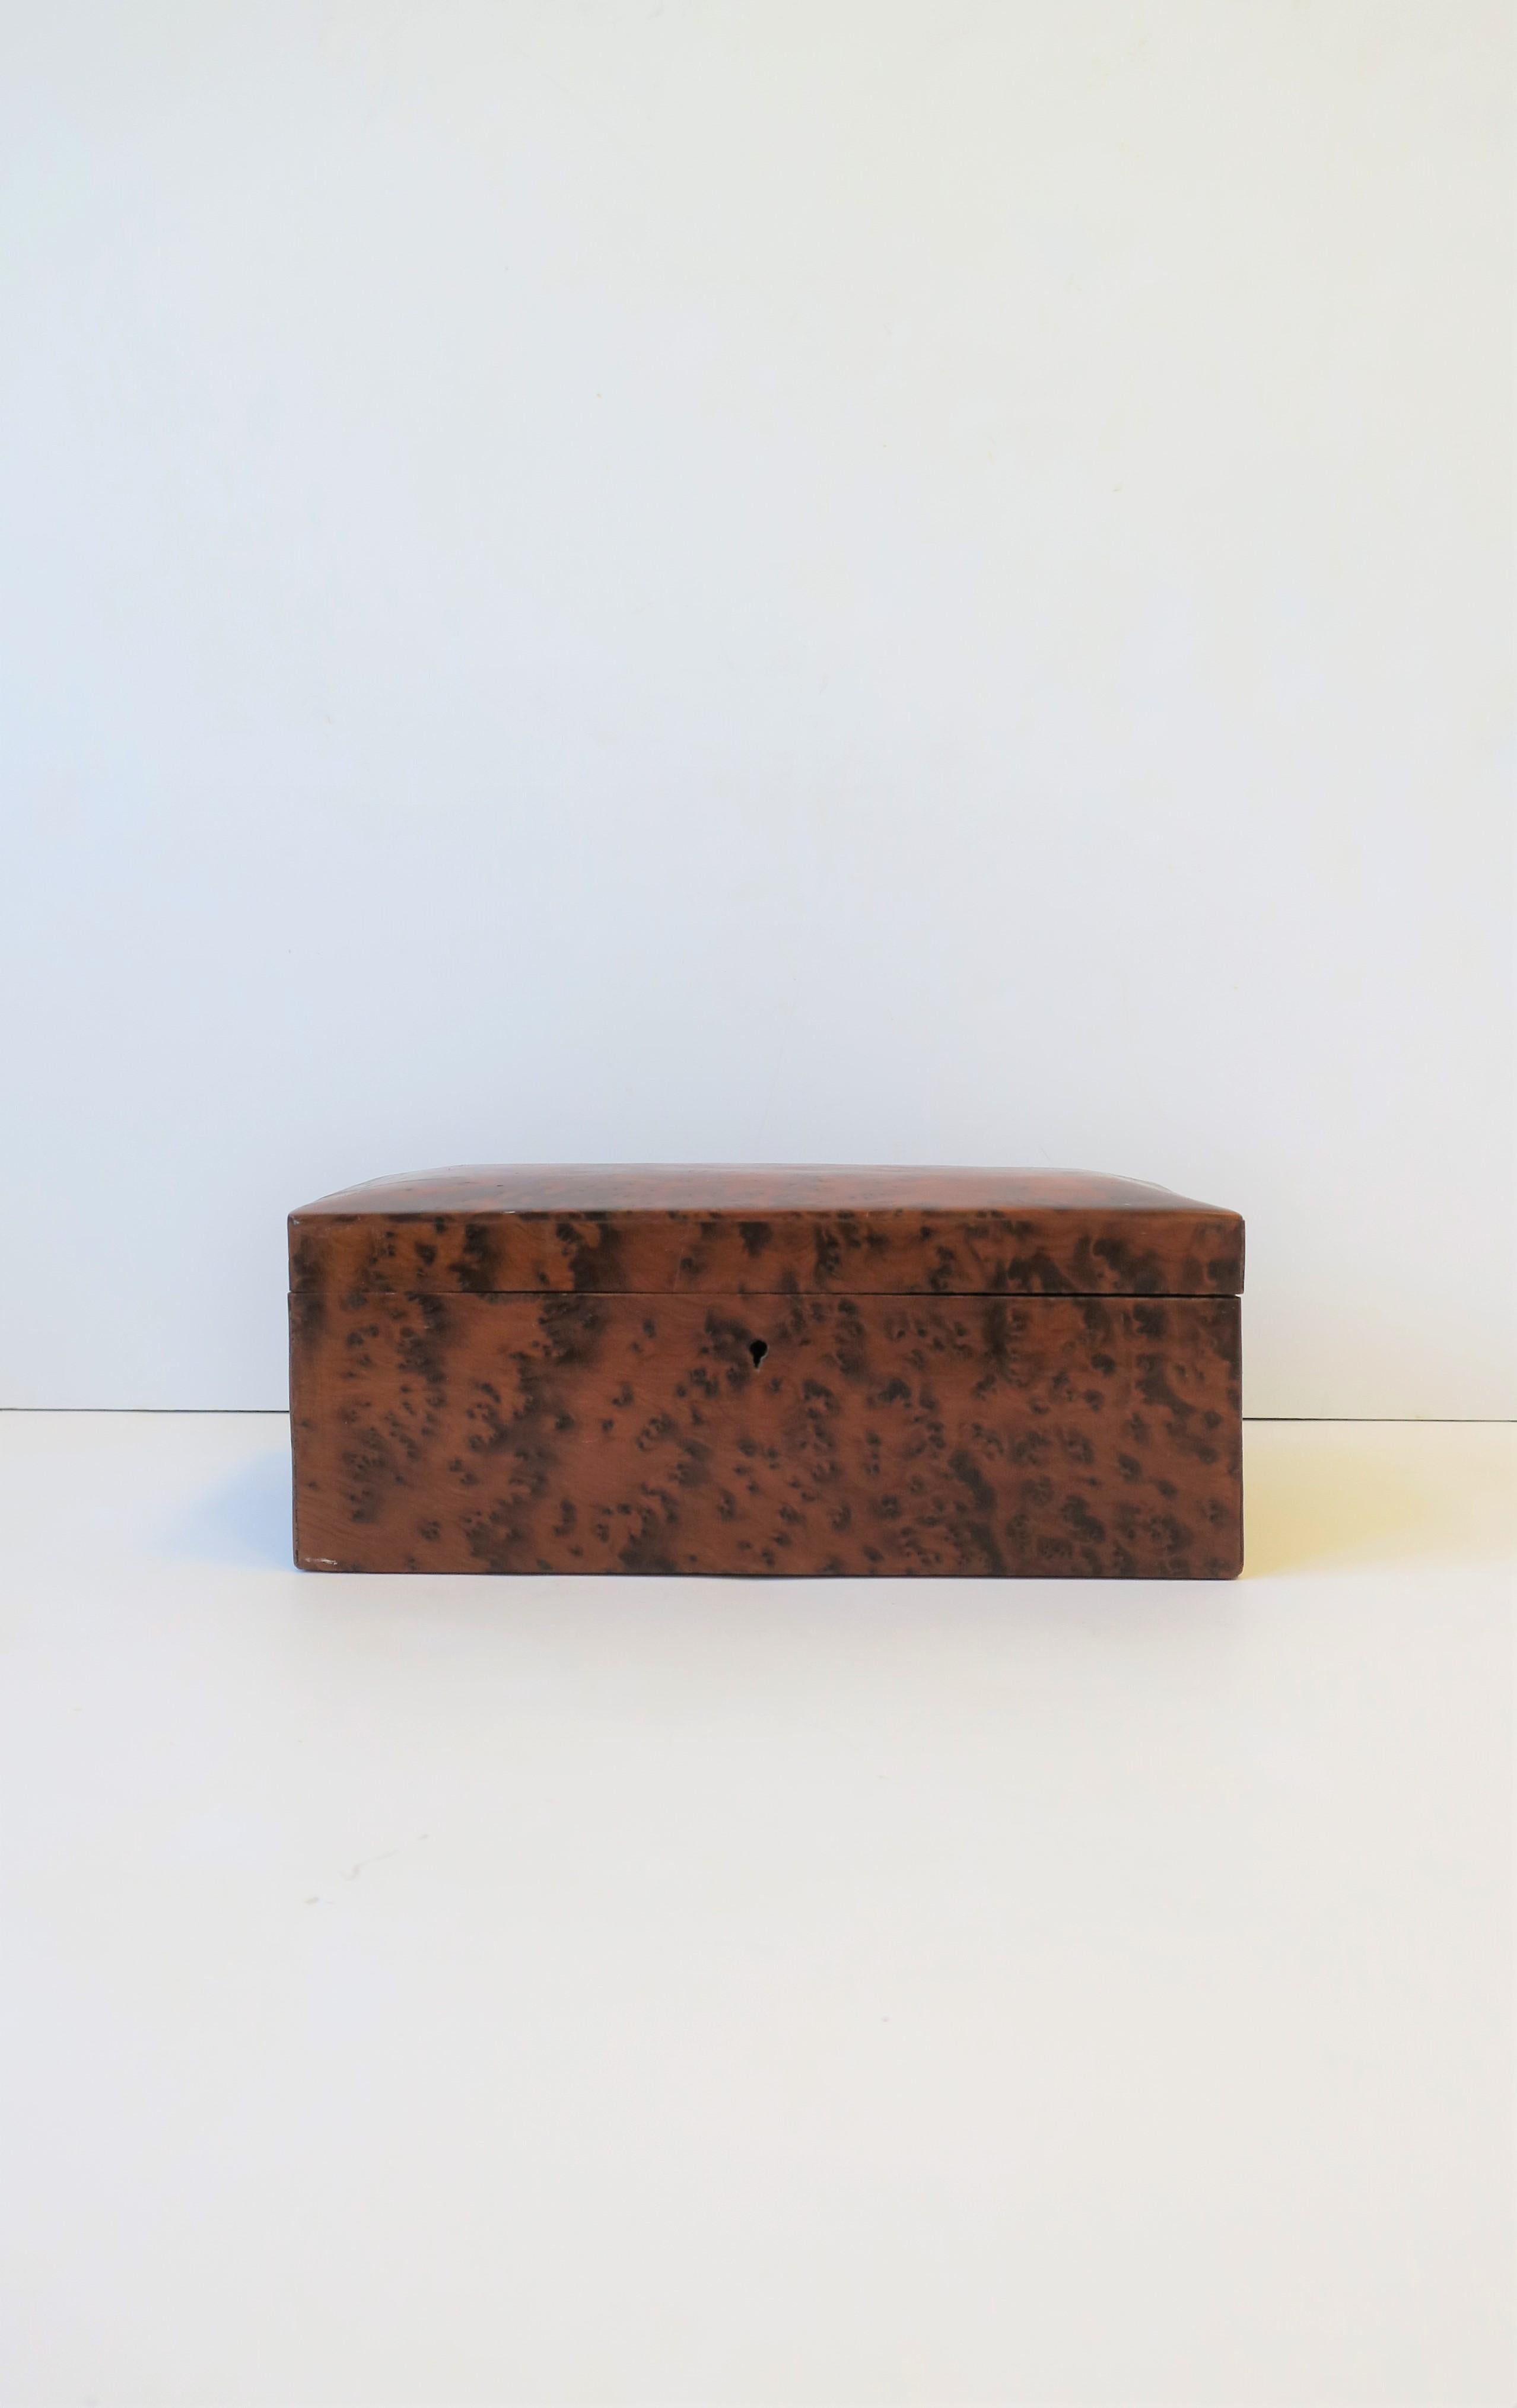 A beautiful Minimalist or organic modern rich burl wood vanity or desk box, circa 20th century. A great box for many different items including jewelry (as demonstrated.) 

Measurements include: 3.78